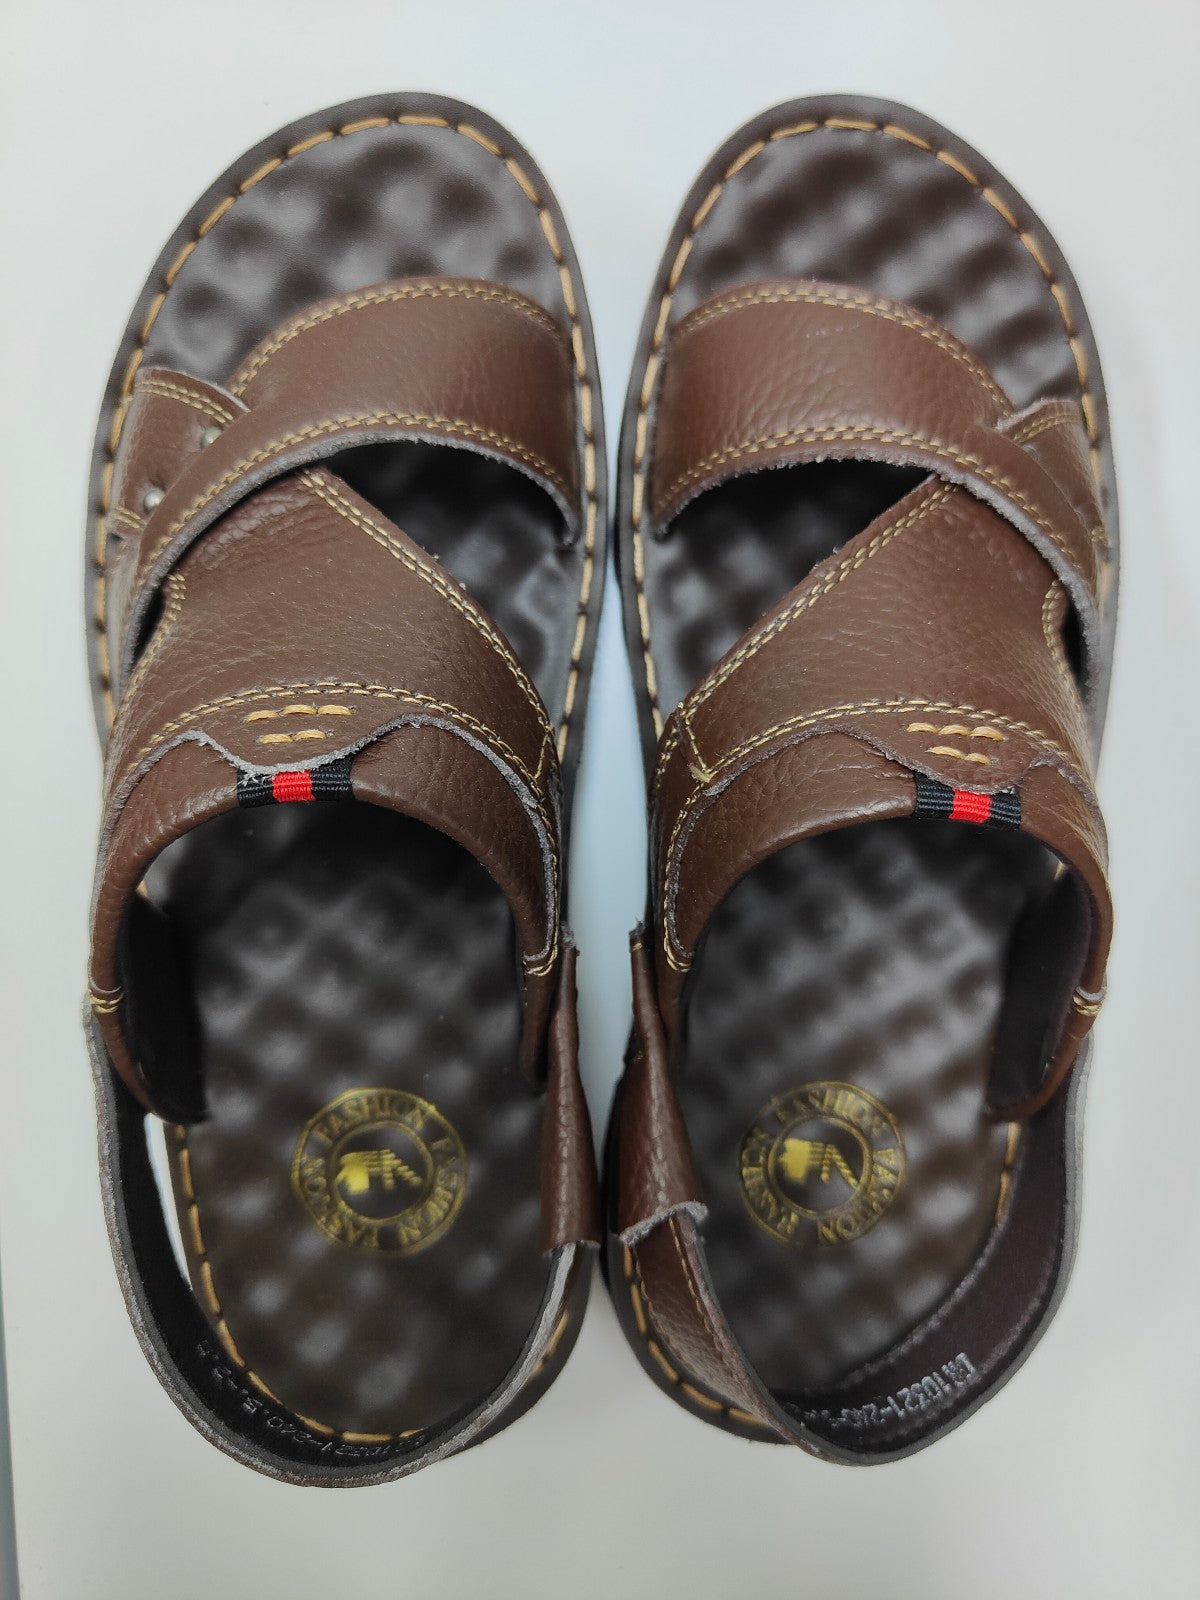 Elevate your style with Dark Brown Design 2 Men's Sandals exclusively from Hikmah Boutique. Crafted with genuine cowhide leather, extra comfort, and an original design. Discover quality and affordability.